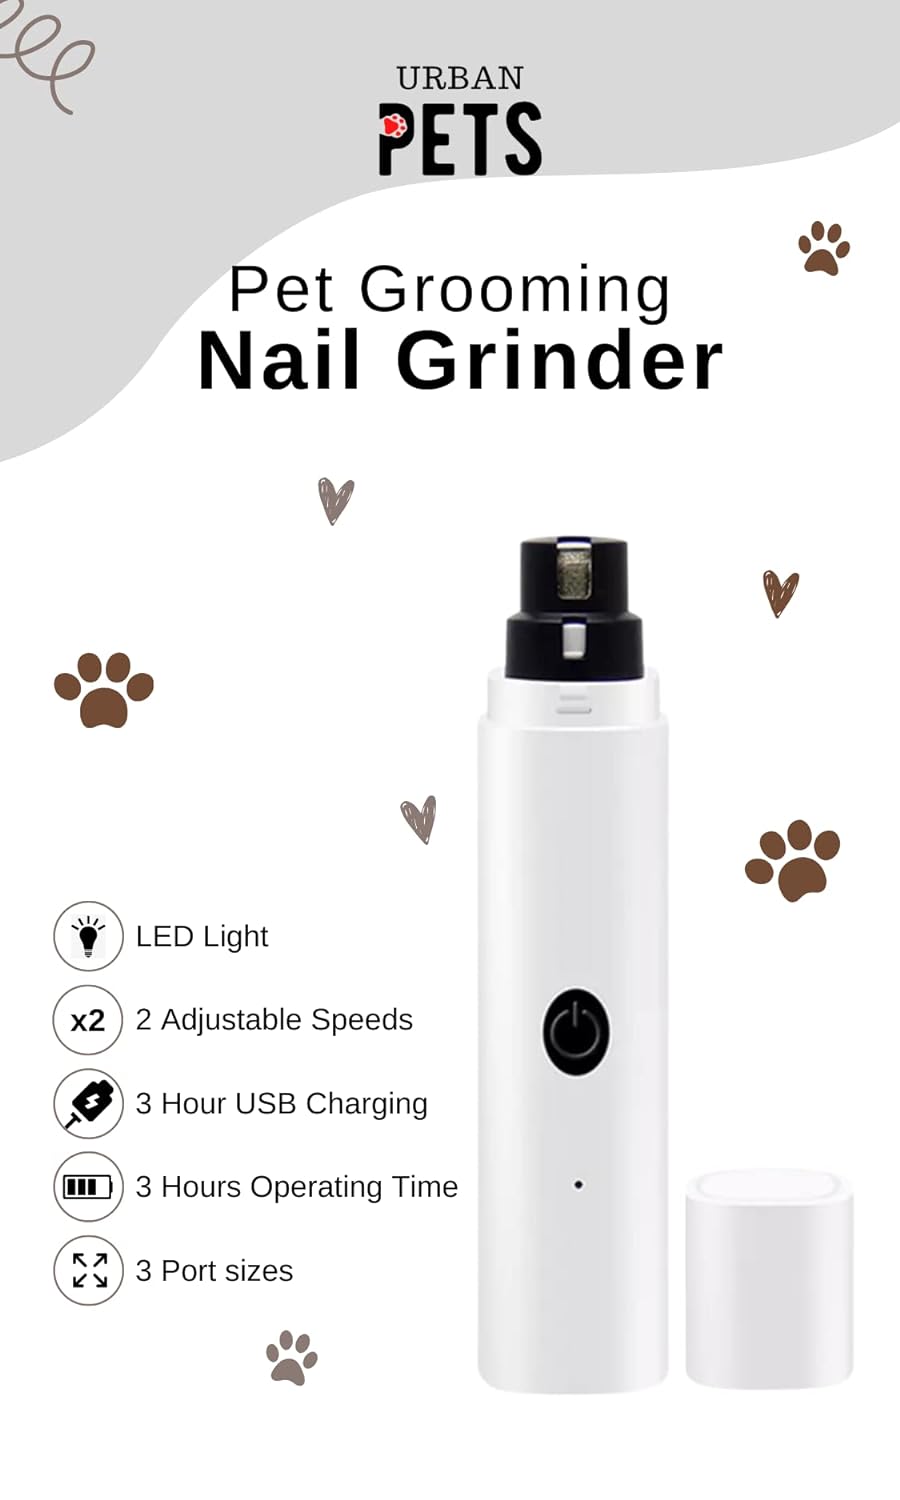 UrbanPets Professional Dog Nail Grinder for pet Grooming. USB Rechargeable, 2 Speed, Dog Nail Trimmers for Small Medium or Large Dogs or Cats. The Best Dog Nail Clipper Grooming kit for Dogs